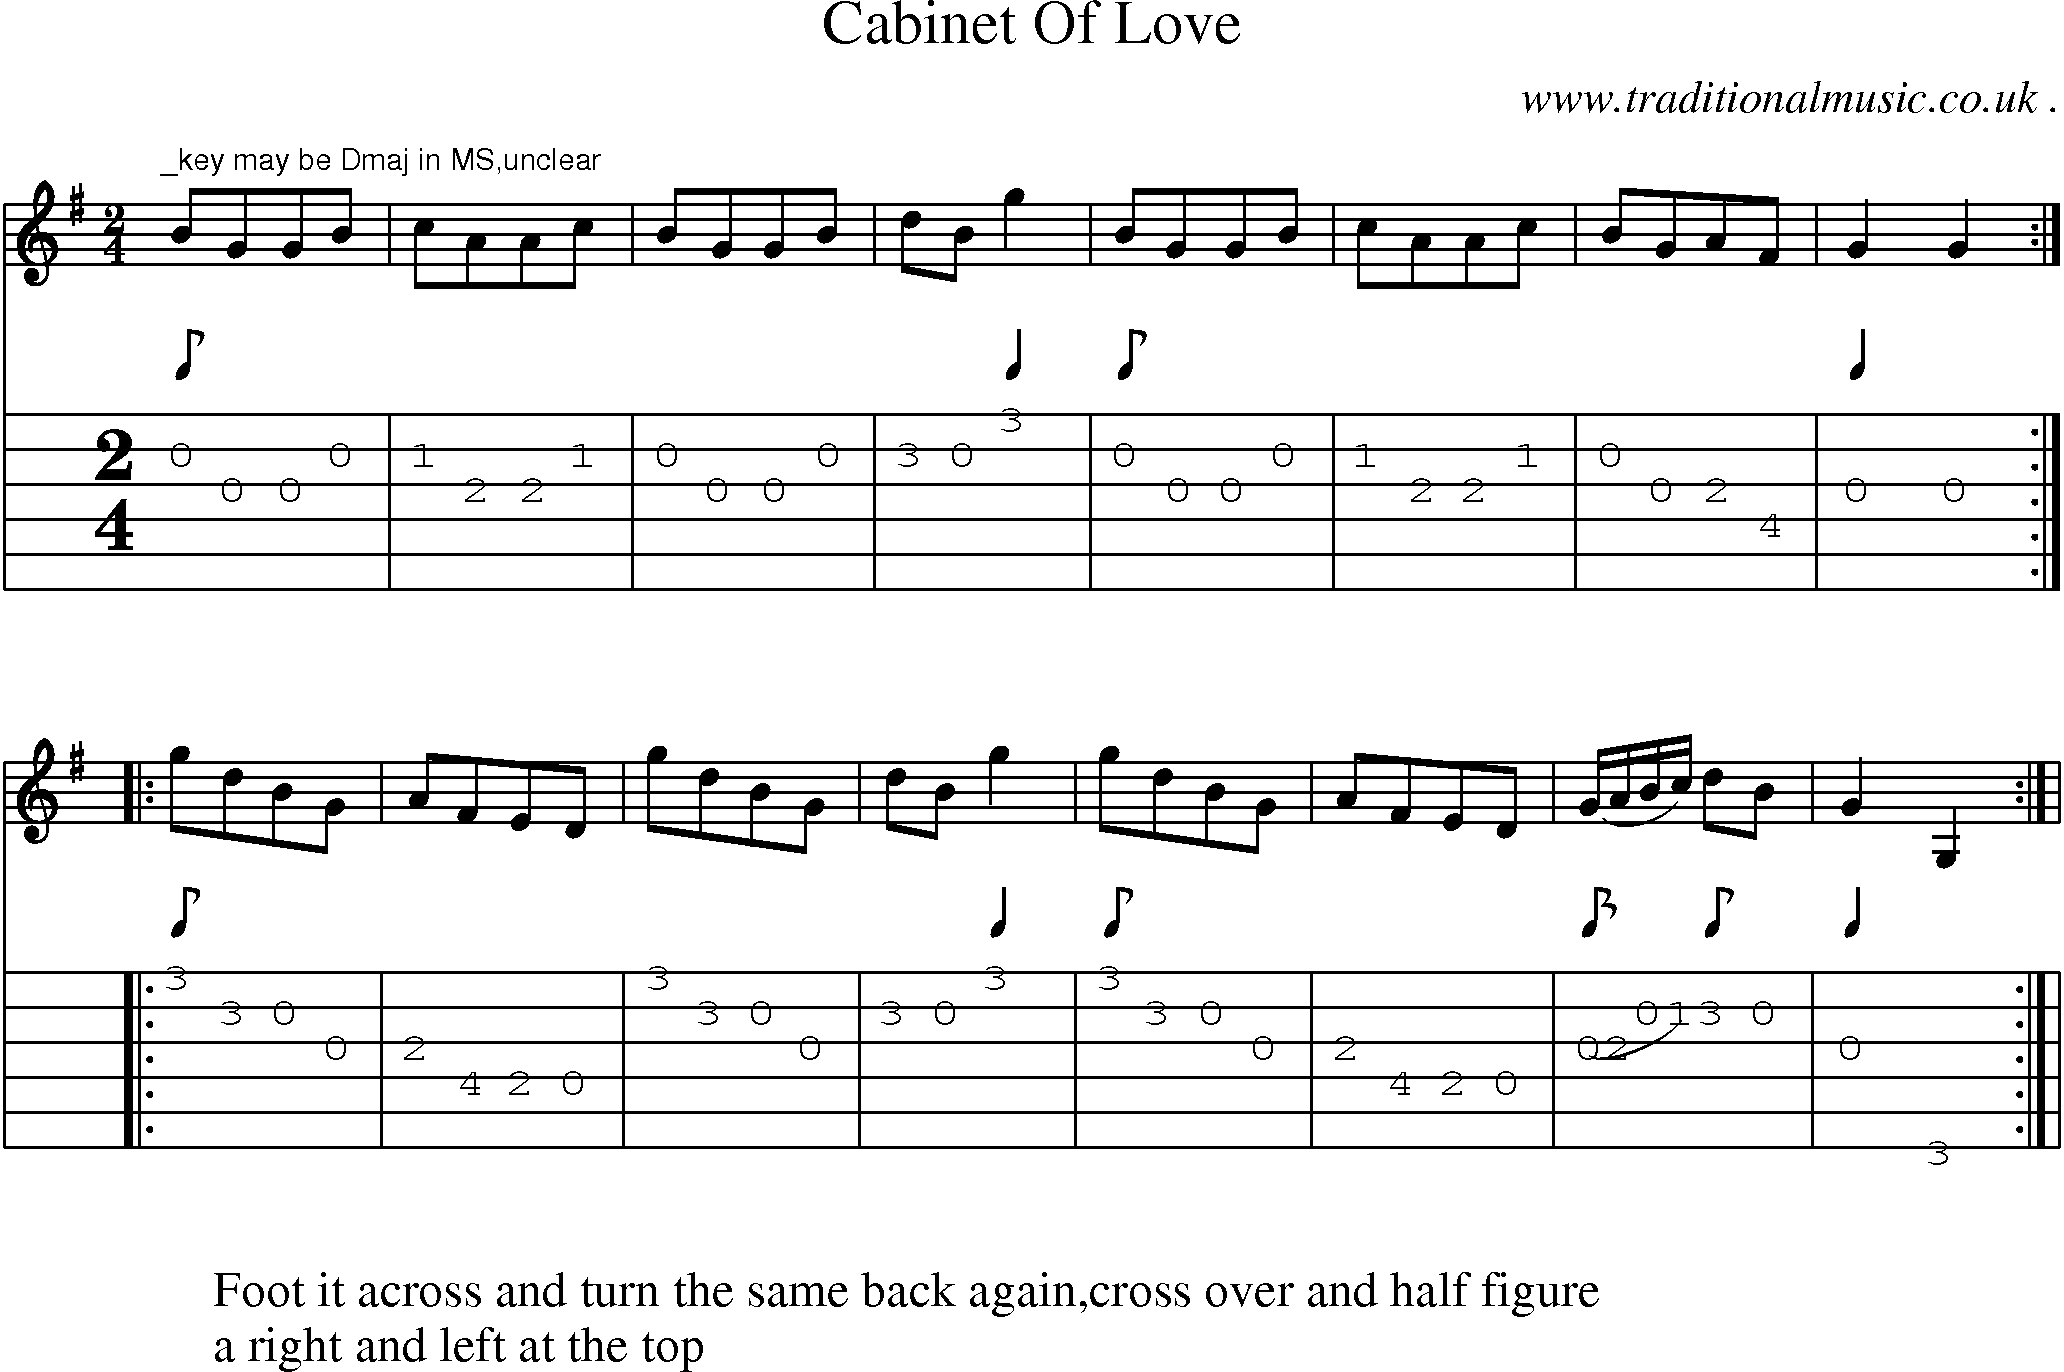 Sheet-Music and Guitar Tabs for Cabinet Of Love